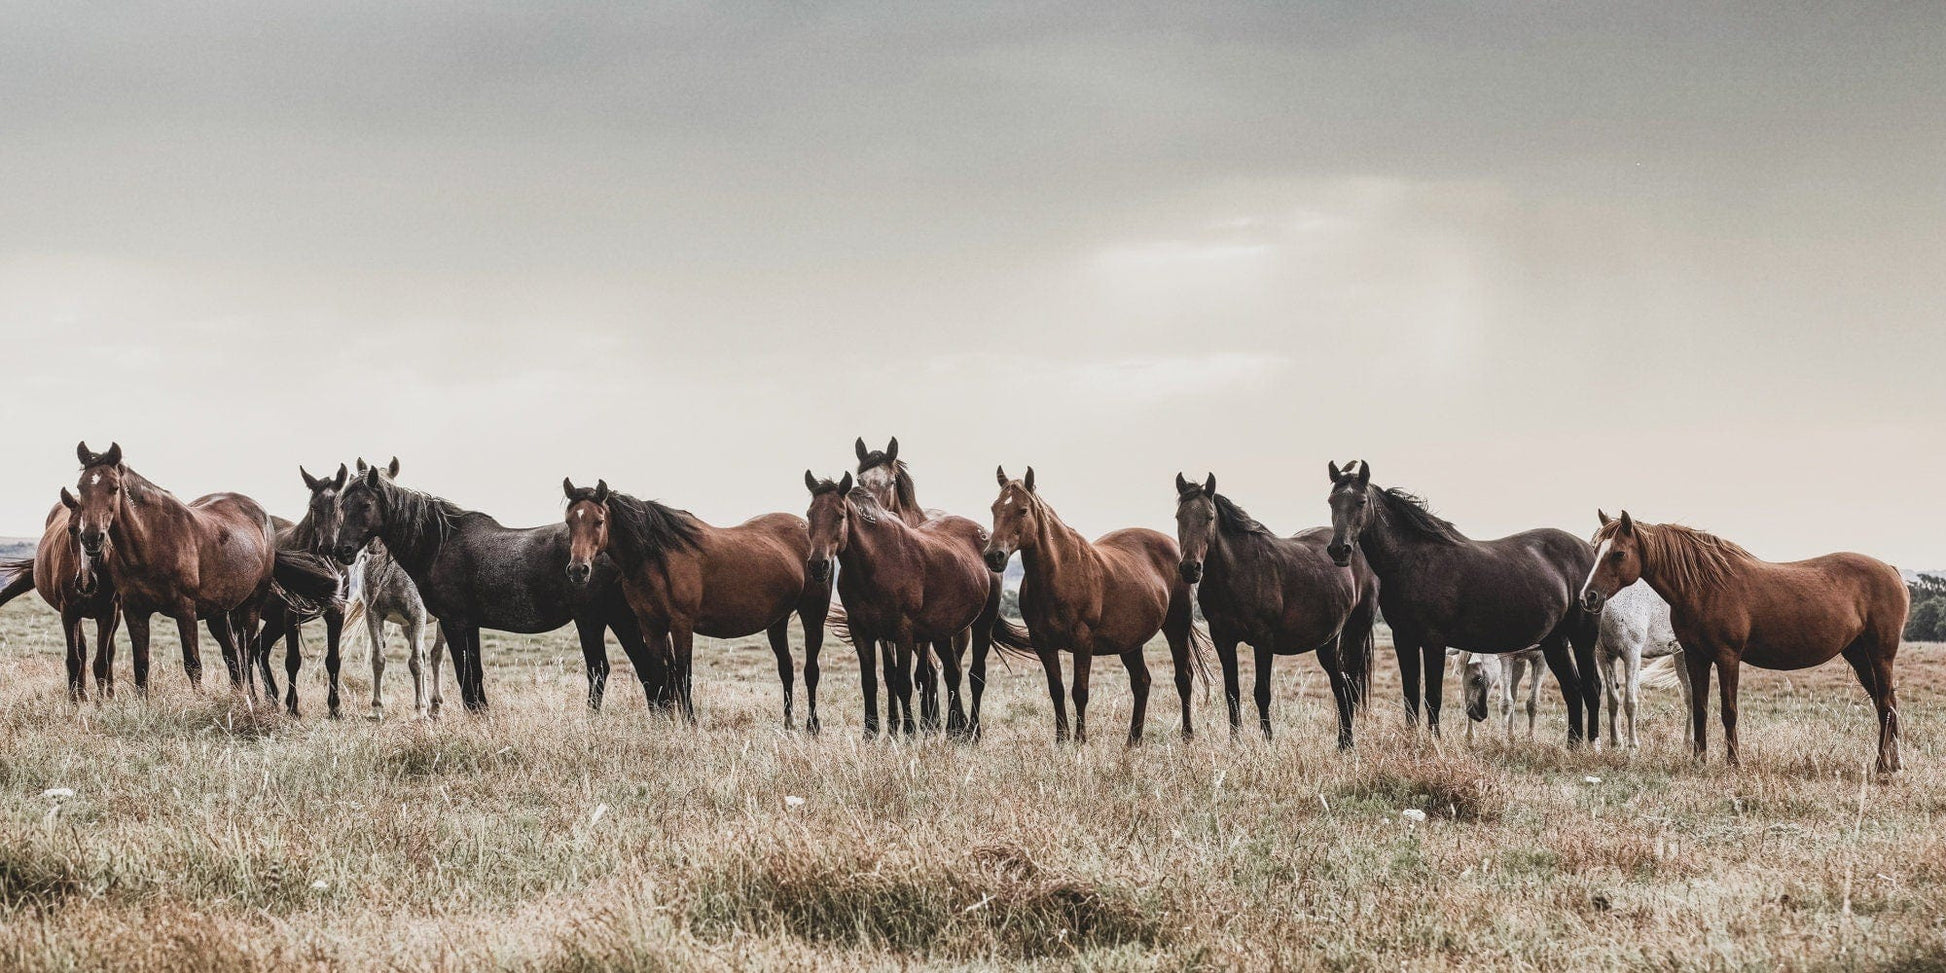 Teri James Photography Wall Art Paper Photo Print / 24 x 48 Inches Panoramic Wild Horse Canvas Print